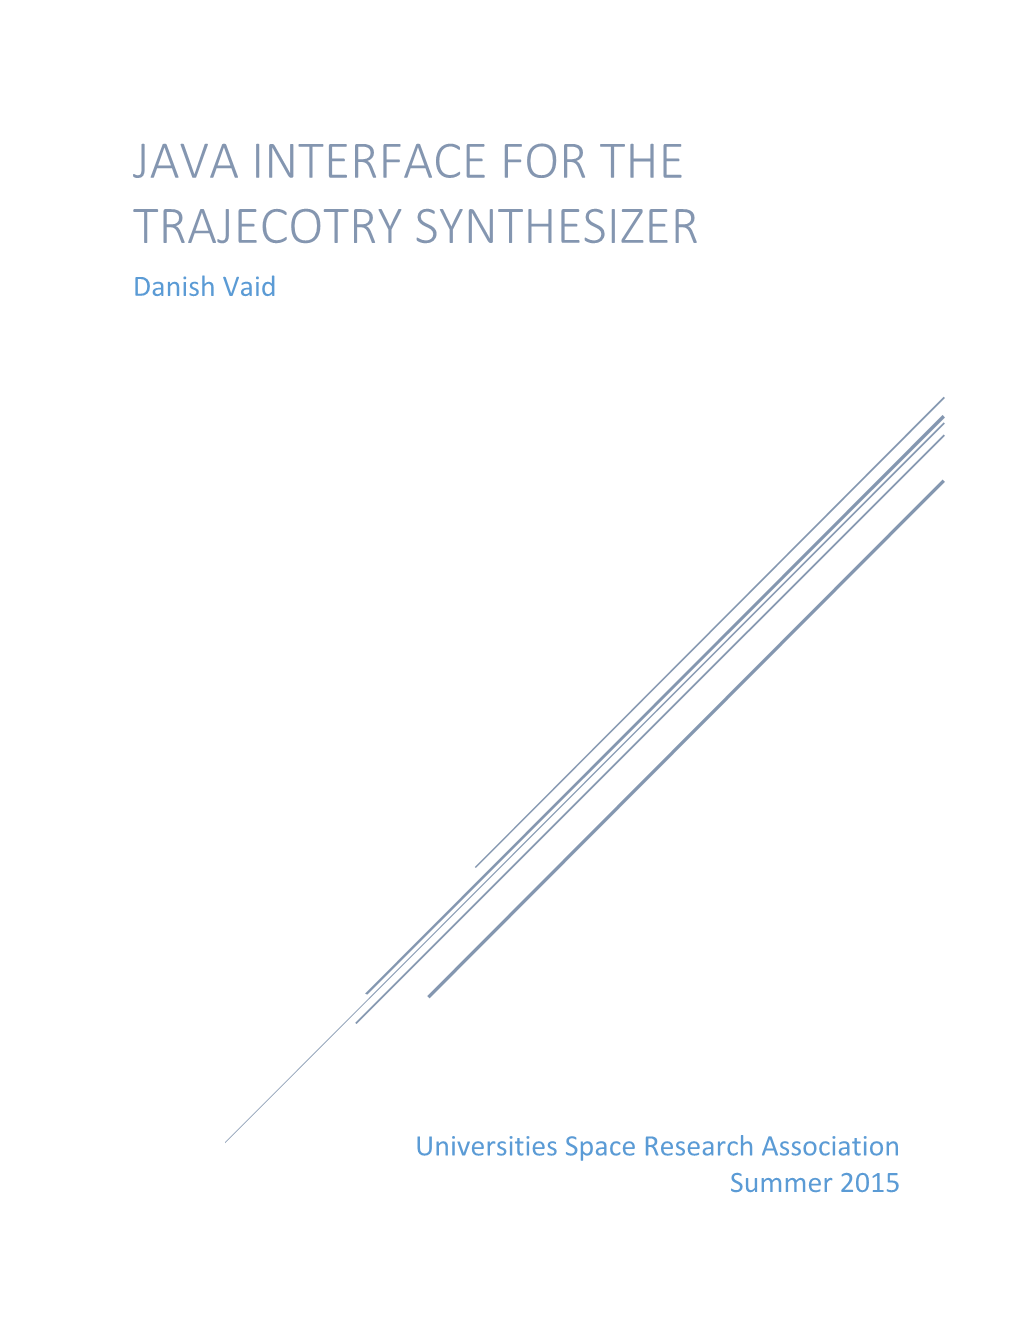 Java Interface for the Trajecotry Synthesizer